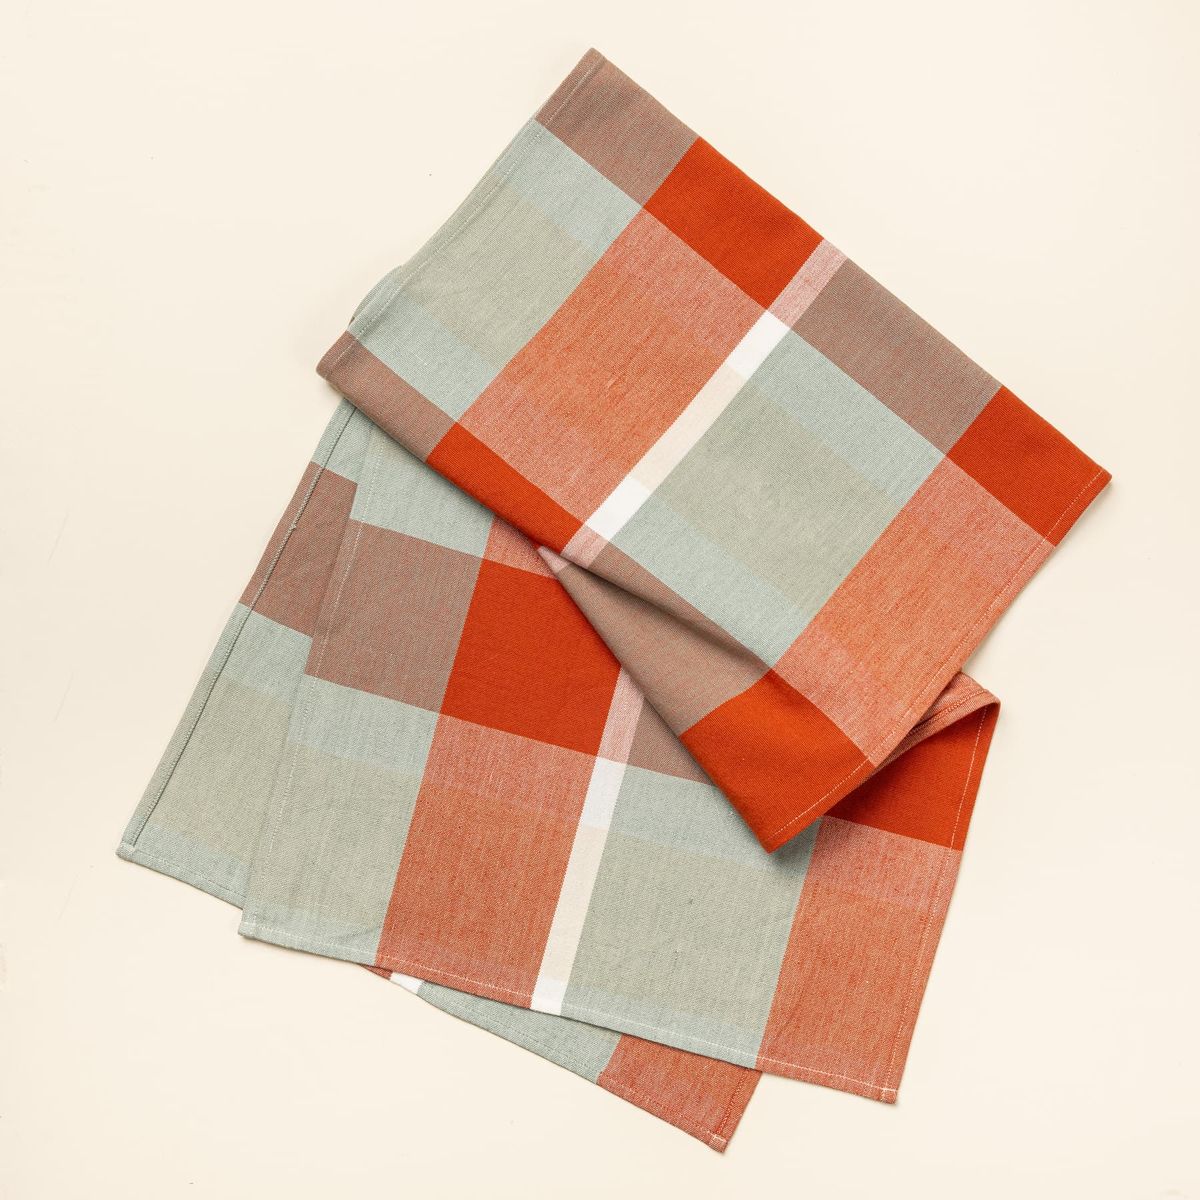 A gingham table runner featuring colors of sage green, bold orange, and cream.